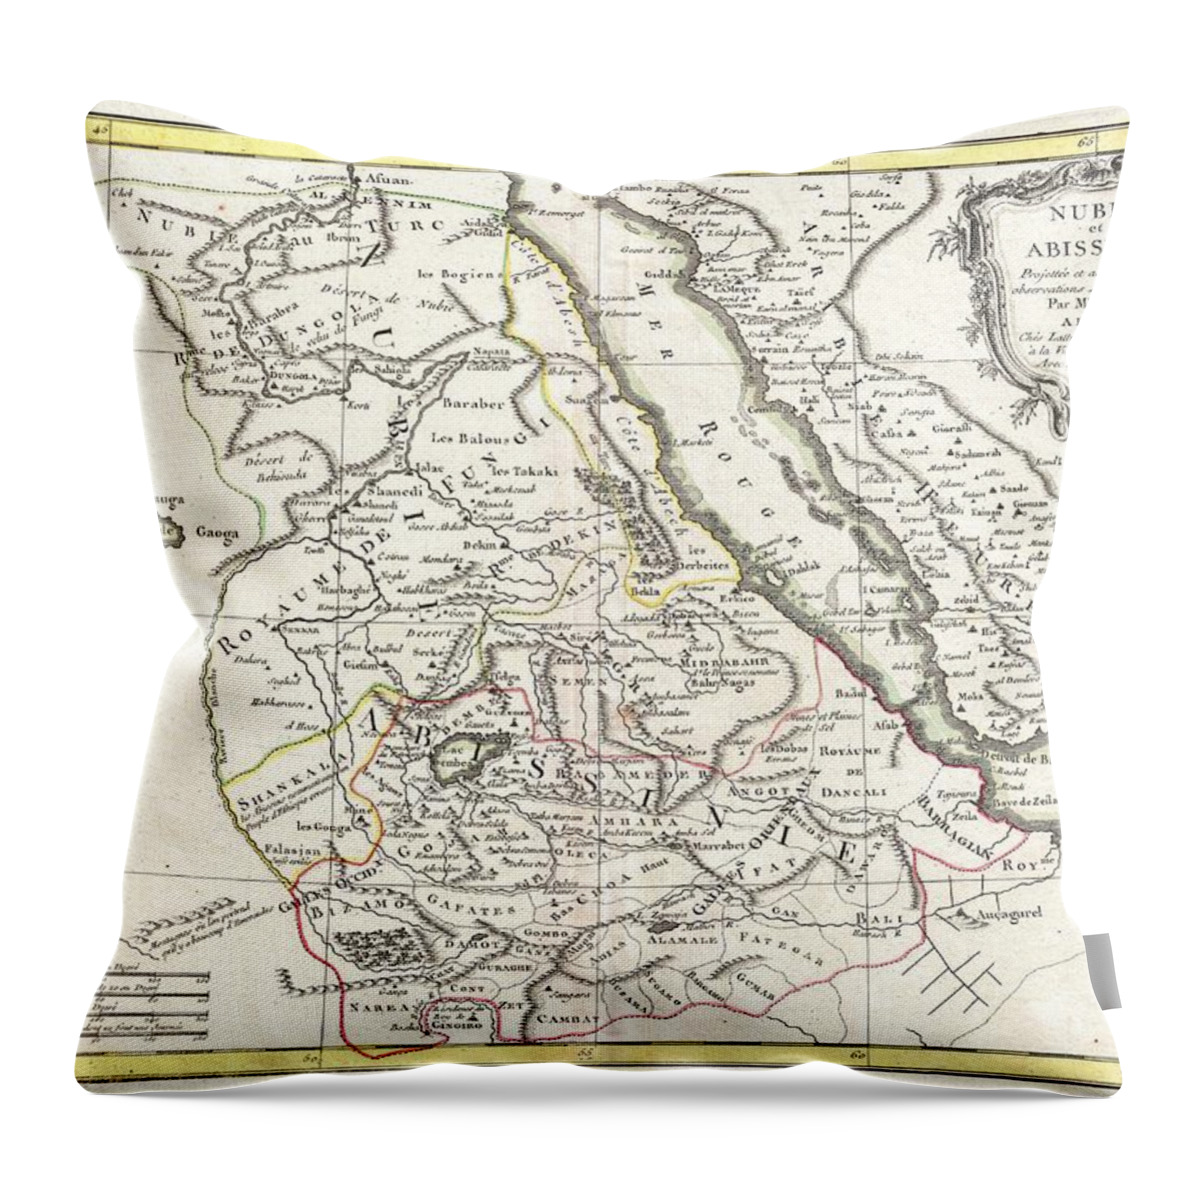 Antique Map Of Abyssinia Throw Pillow featuring the drawing Antique Maps - Old Cartographic maps - Antique Map of Abyssinia, Sudan and The Red Sea, 1771 by Studio Grafiikka